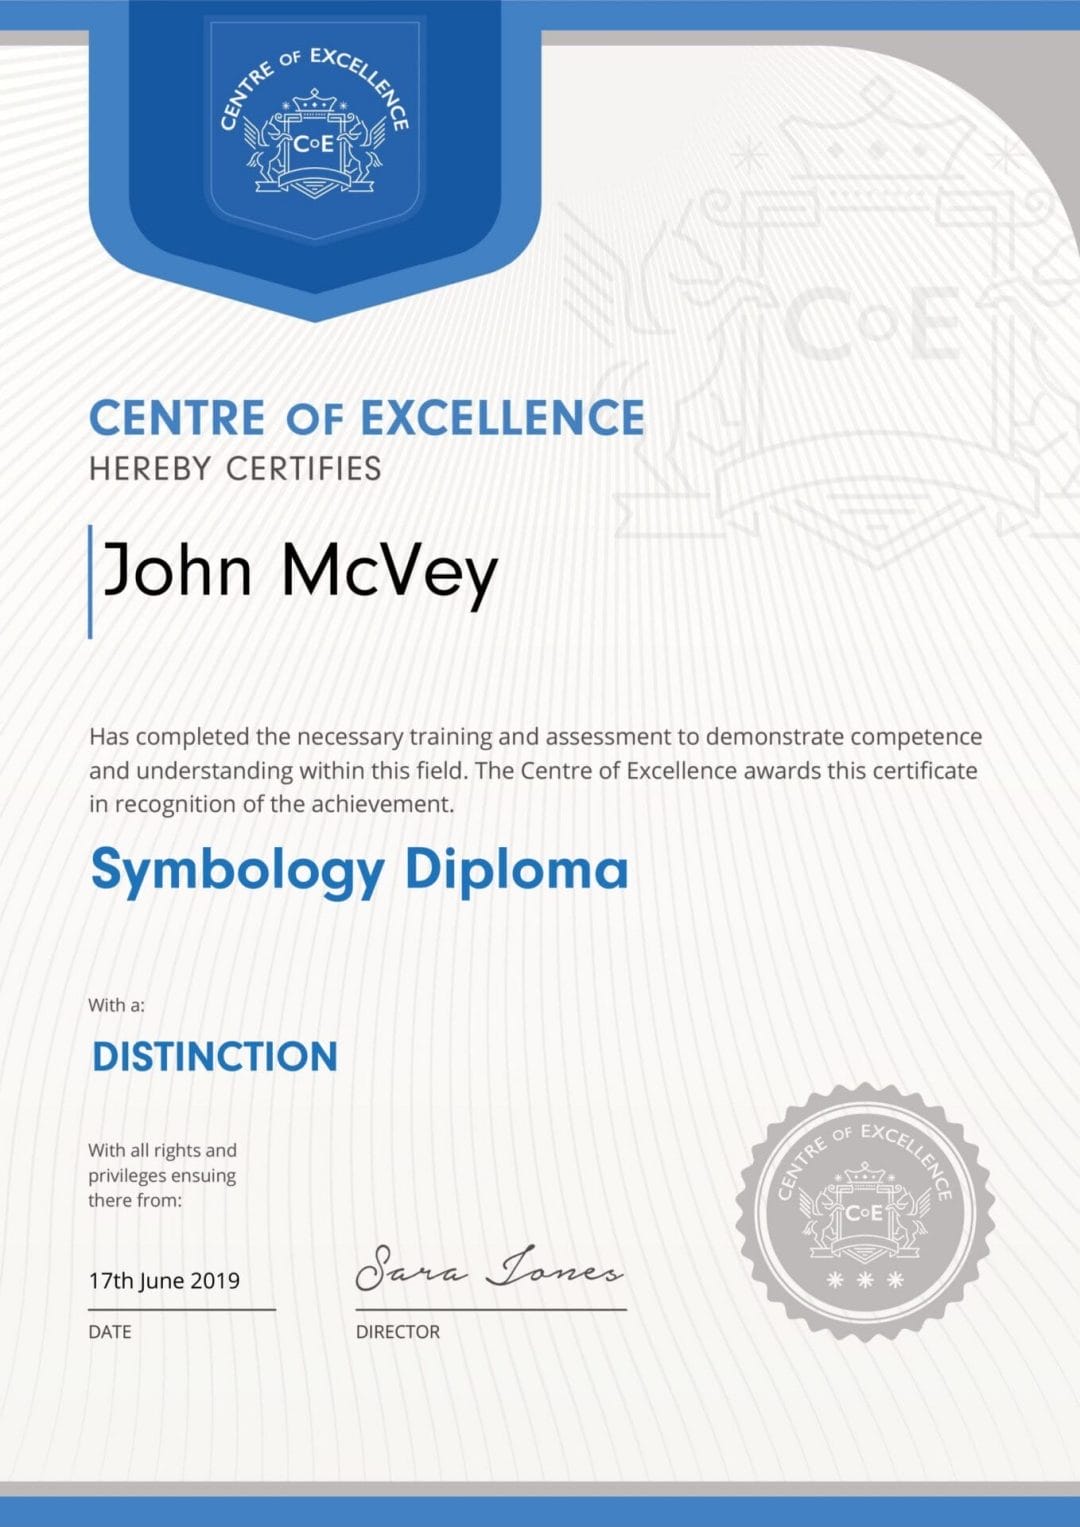 A certificate for john mcvey's symbiology diploma.